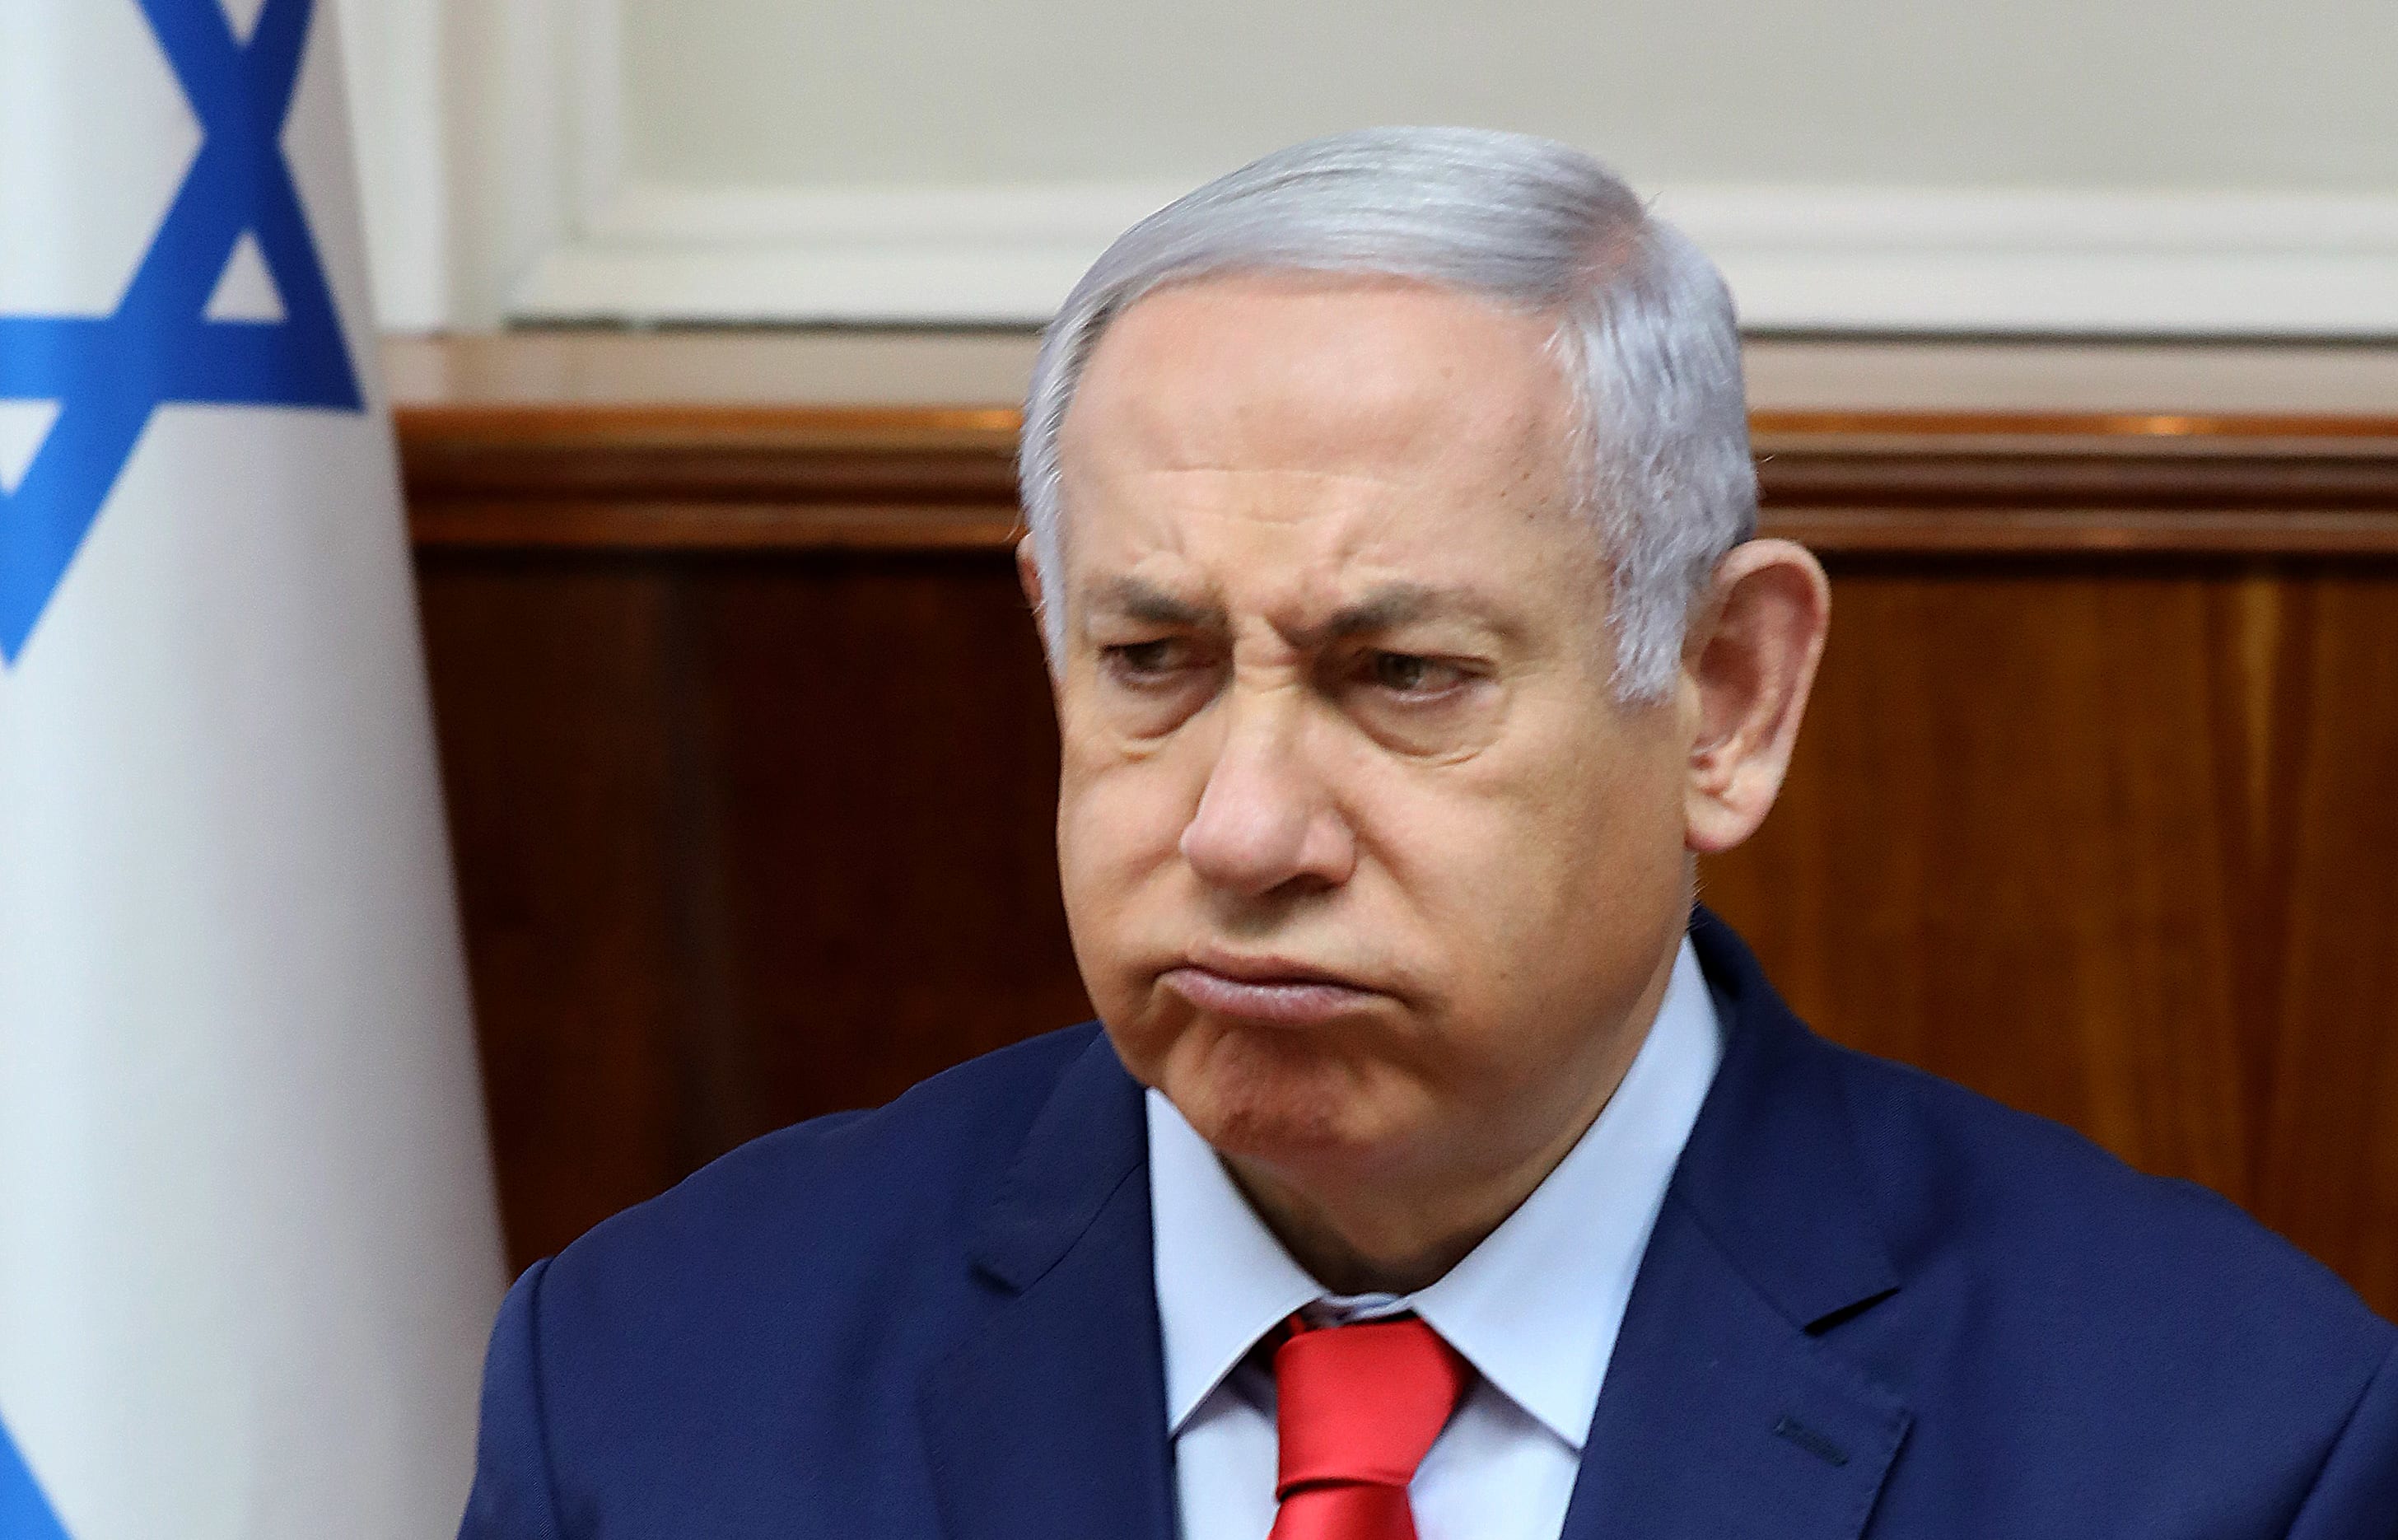 Israeli Prime Minister Benjamin Netanyahu reacts at the start of the weekly cabinet meeting at his Jerusalem office on May 12, 2019. (Photo by GALI TIBBON / POOL / AFP)